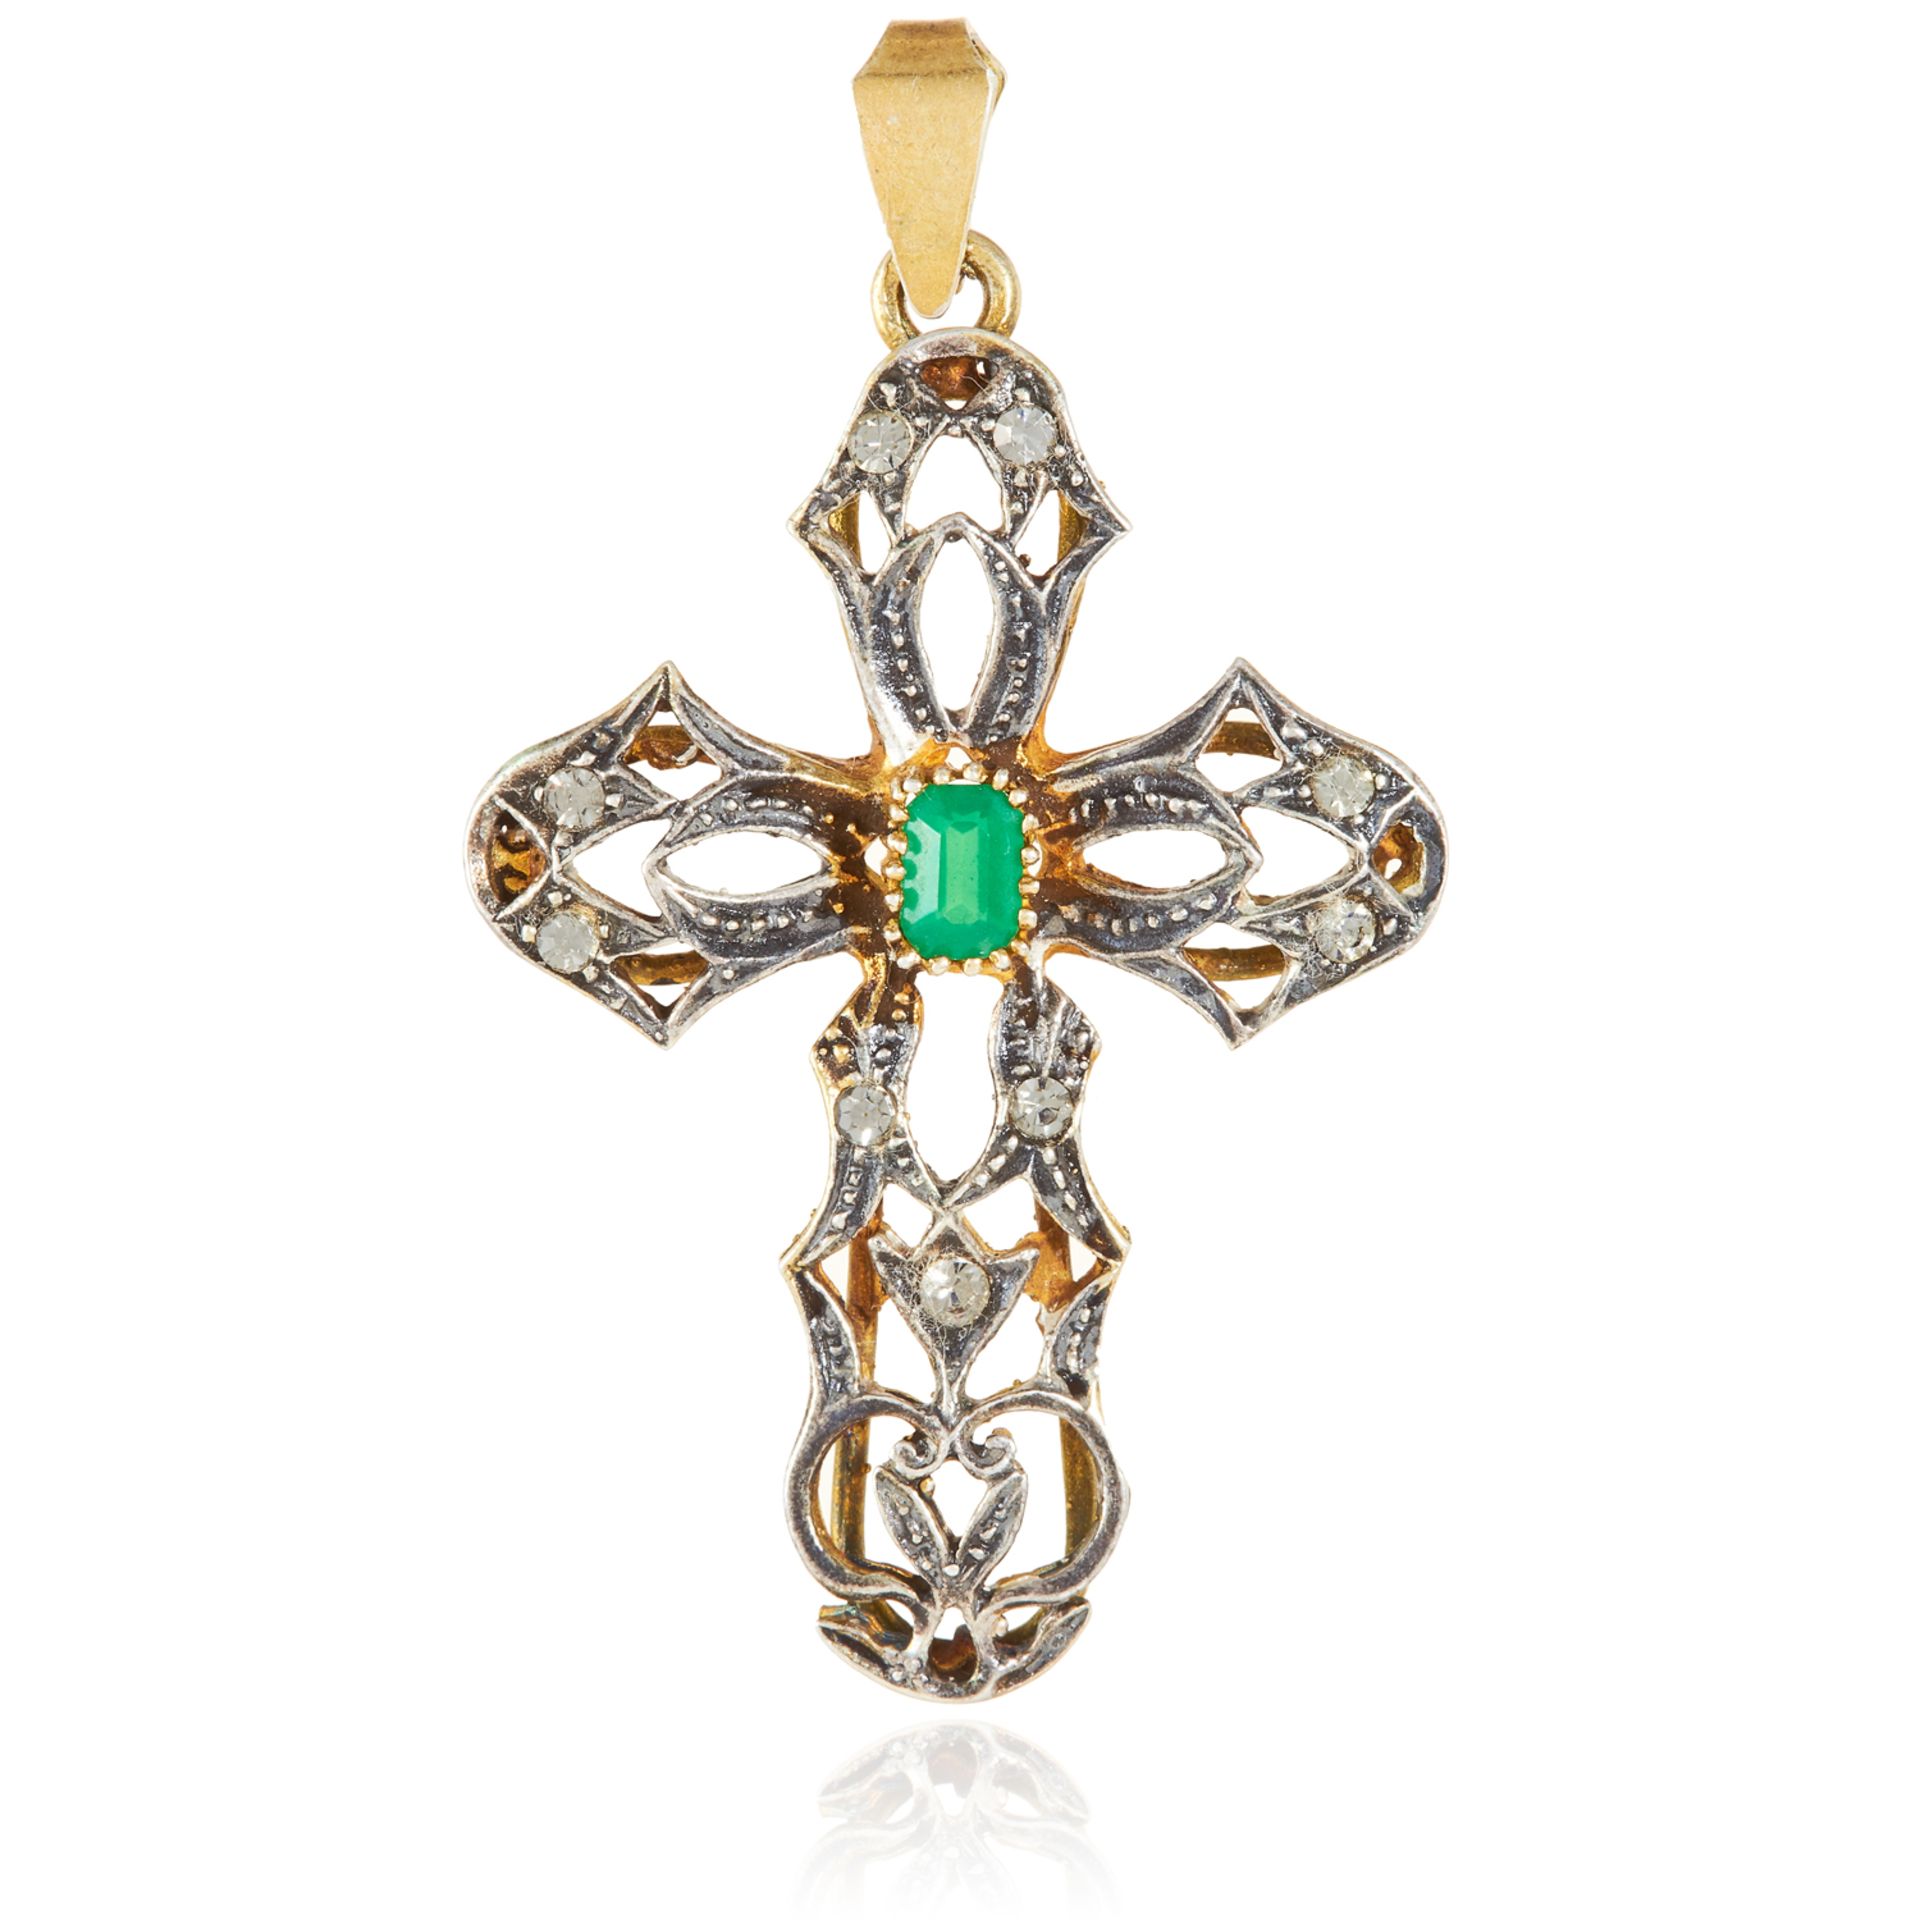 AN EMERALD AND DIAMOND CRUCIFIX PENDANT, PORTUGUESE in high carat yellow gold and silver, the